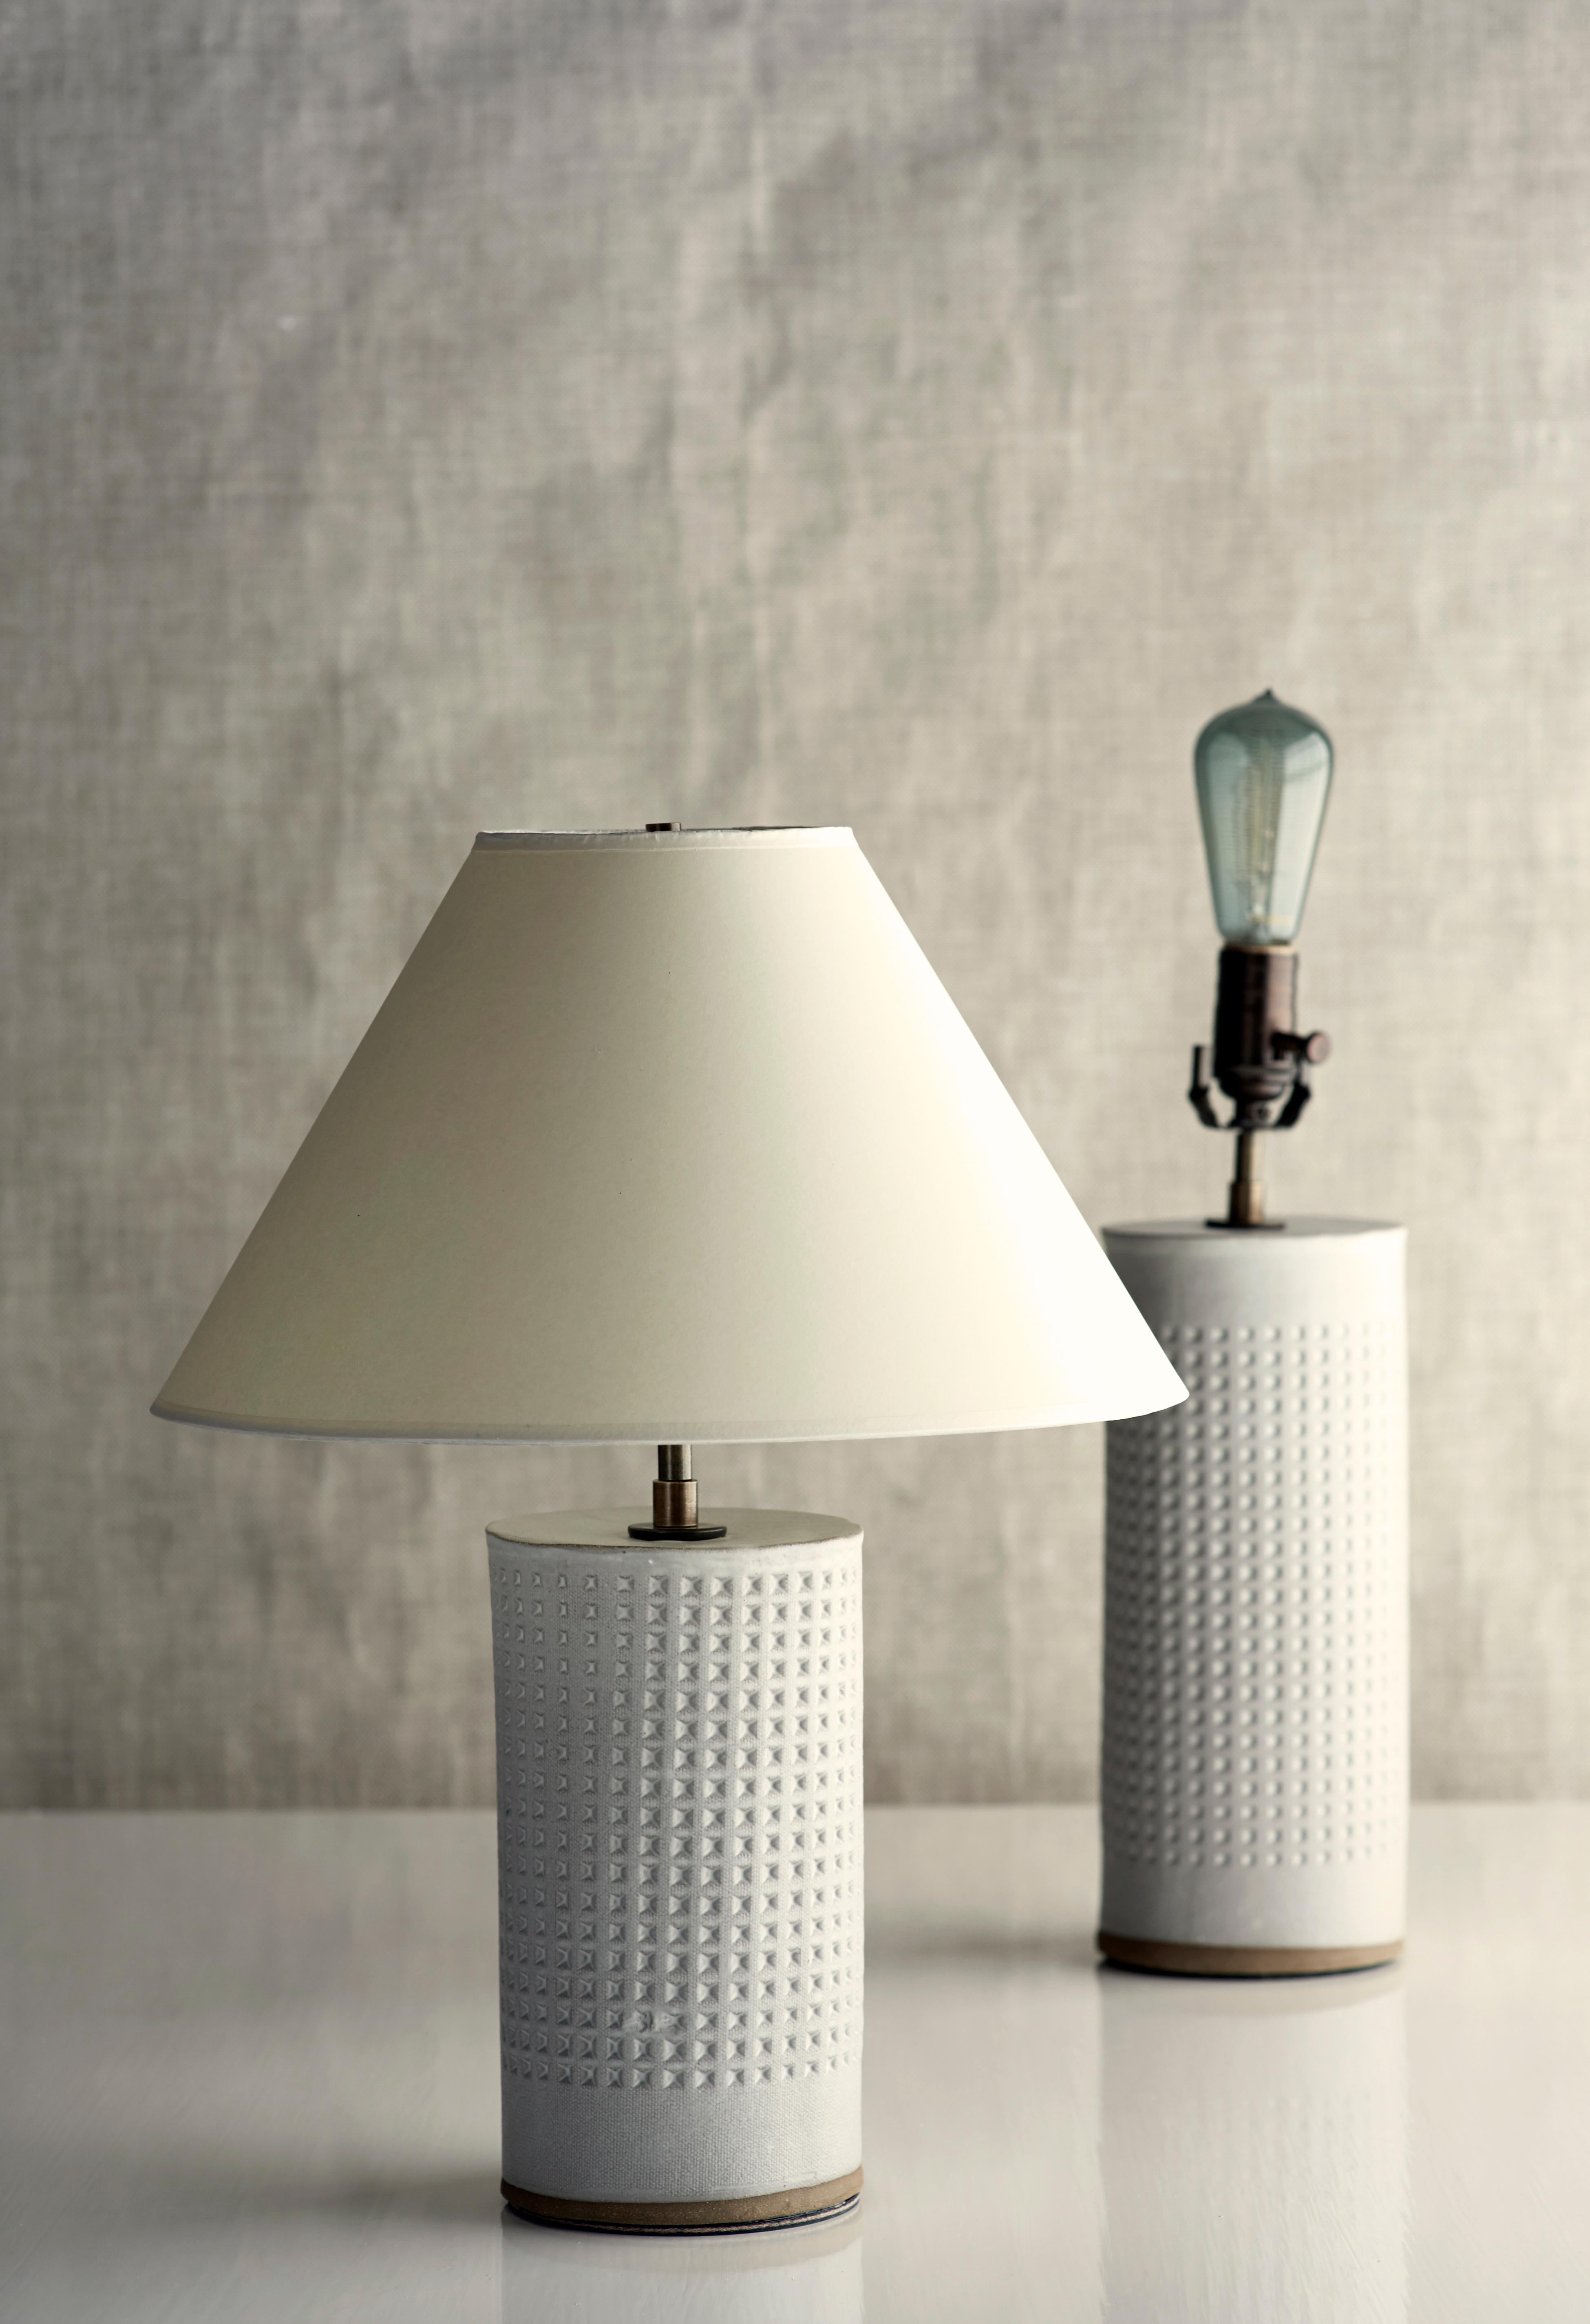 DESCRIPTION

Handmade stoneware slab construction with waffle texture. Lamps are individually crafted and one of a kind.

FINISH

Chalk White glaze with waffle texture. Antique brass fittings with dimmer switch on socket. Braided black cloth cord